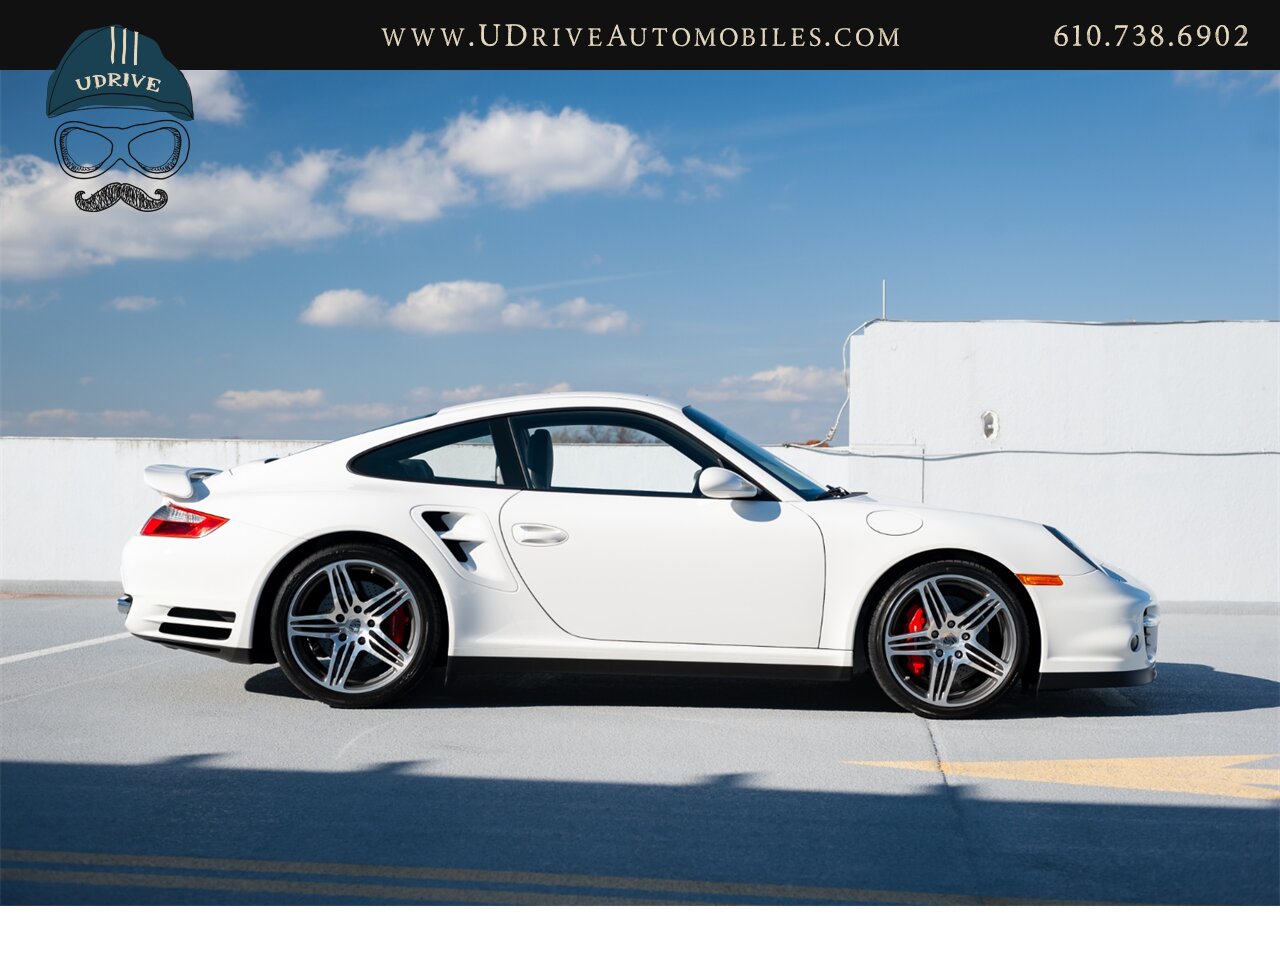 2007 Porsche 911 Turbo 642 Miles 1 Owner Carrara White 997  Sport Chrono Adaptive Sport Seats All Documentation from New - Photo 13 - West Chester, PA 19382